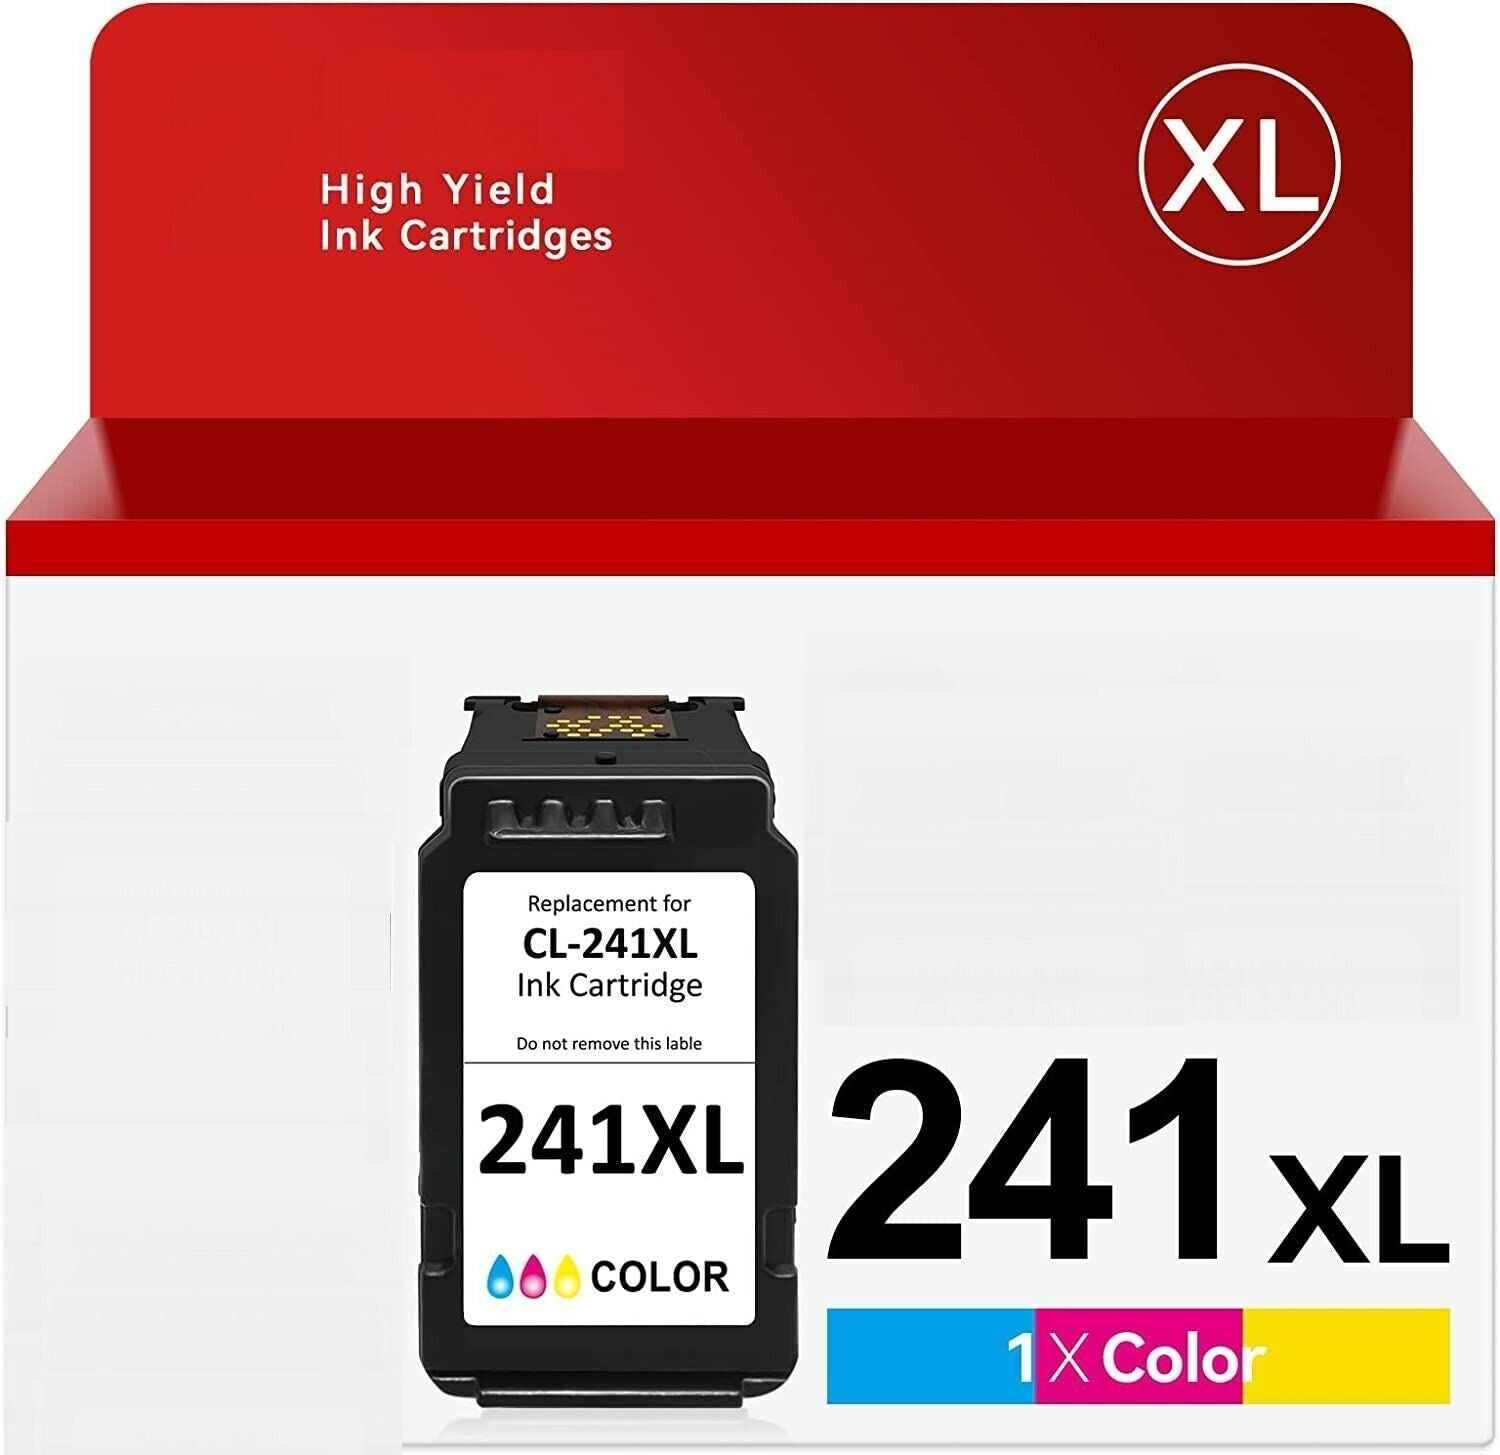 CL241XL IMPERIAL BRAND CANON COLOR HY CL-241XL INKJET CRTG 5208B00